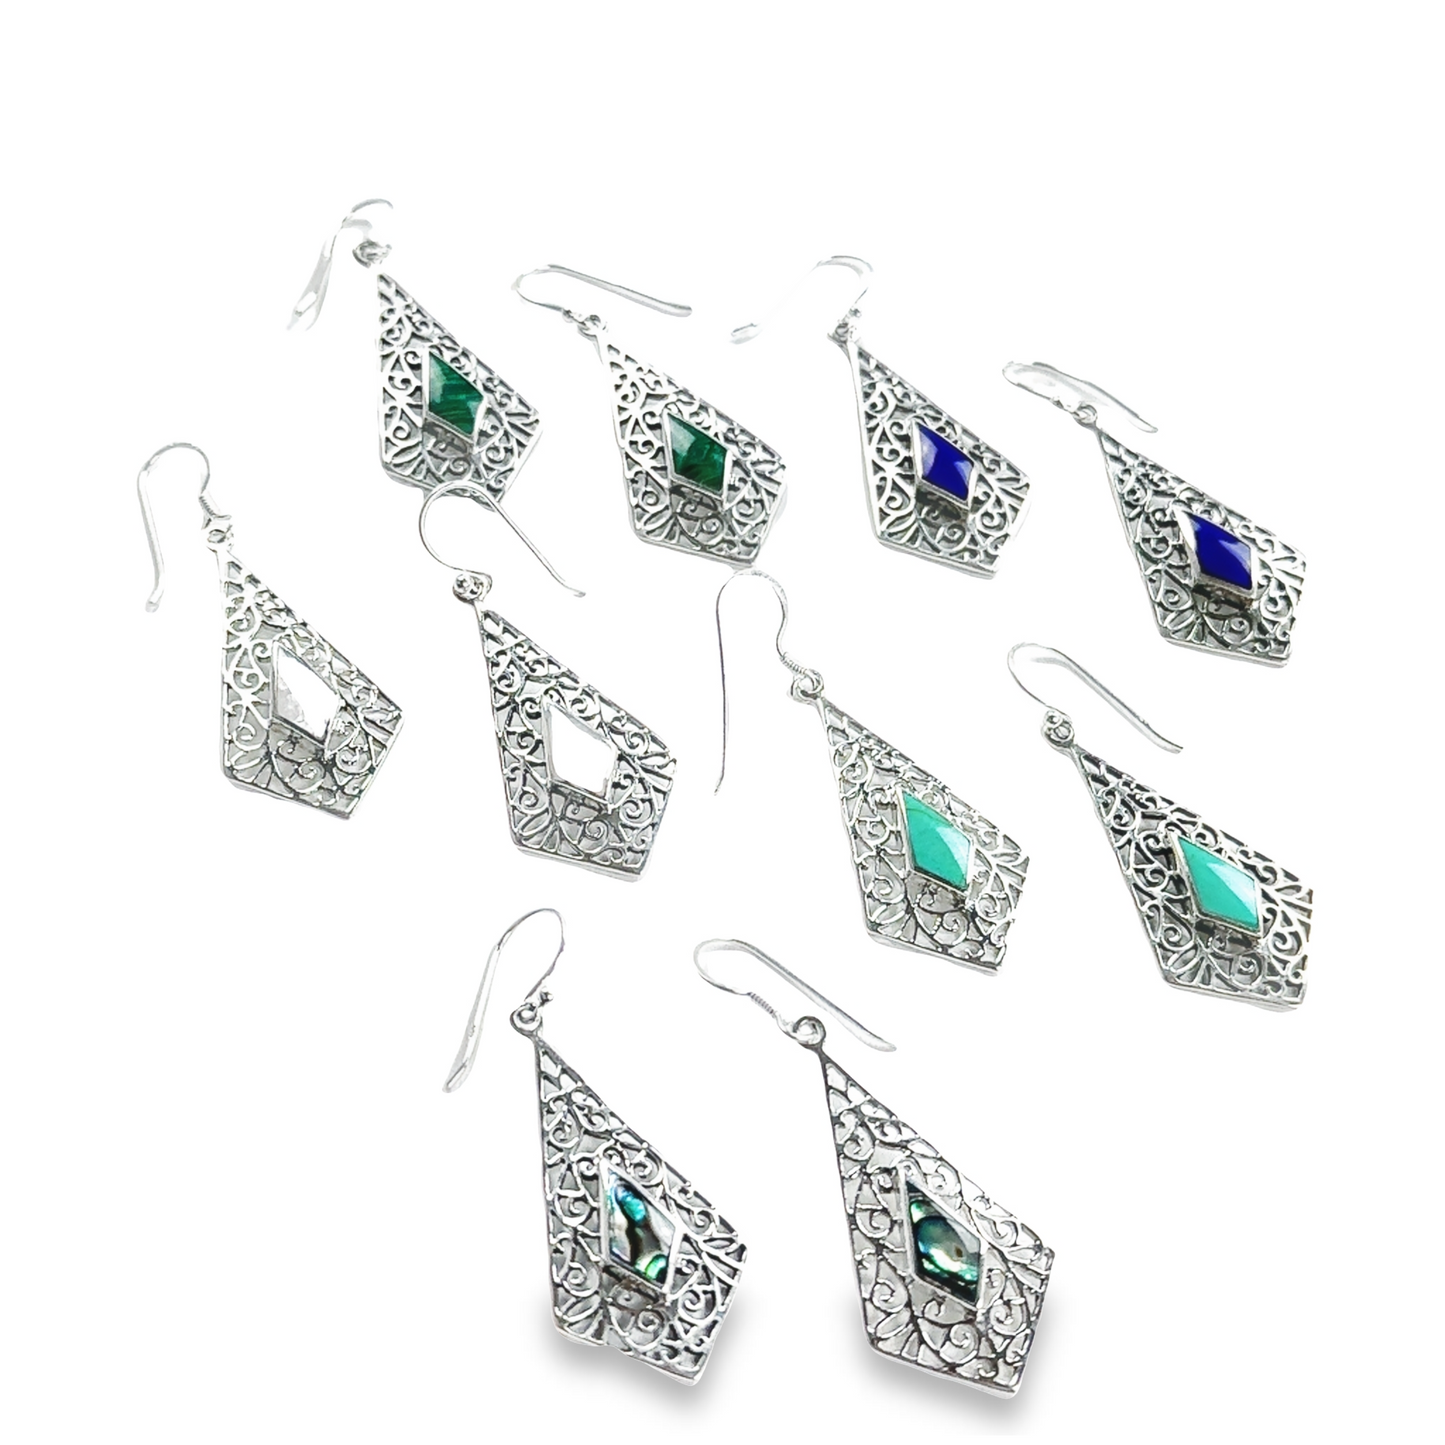 A pair of Elongated Diamond Teardrop Earrings with Inlaid Stones from Super Silver, featuring intricate filigree patterns.